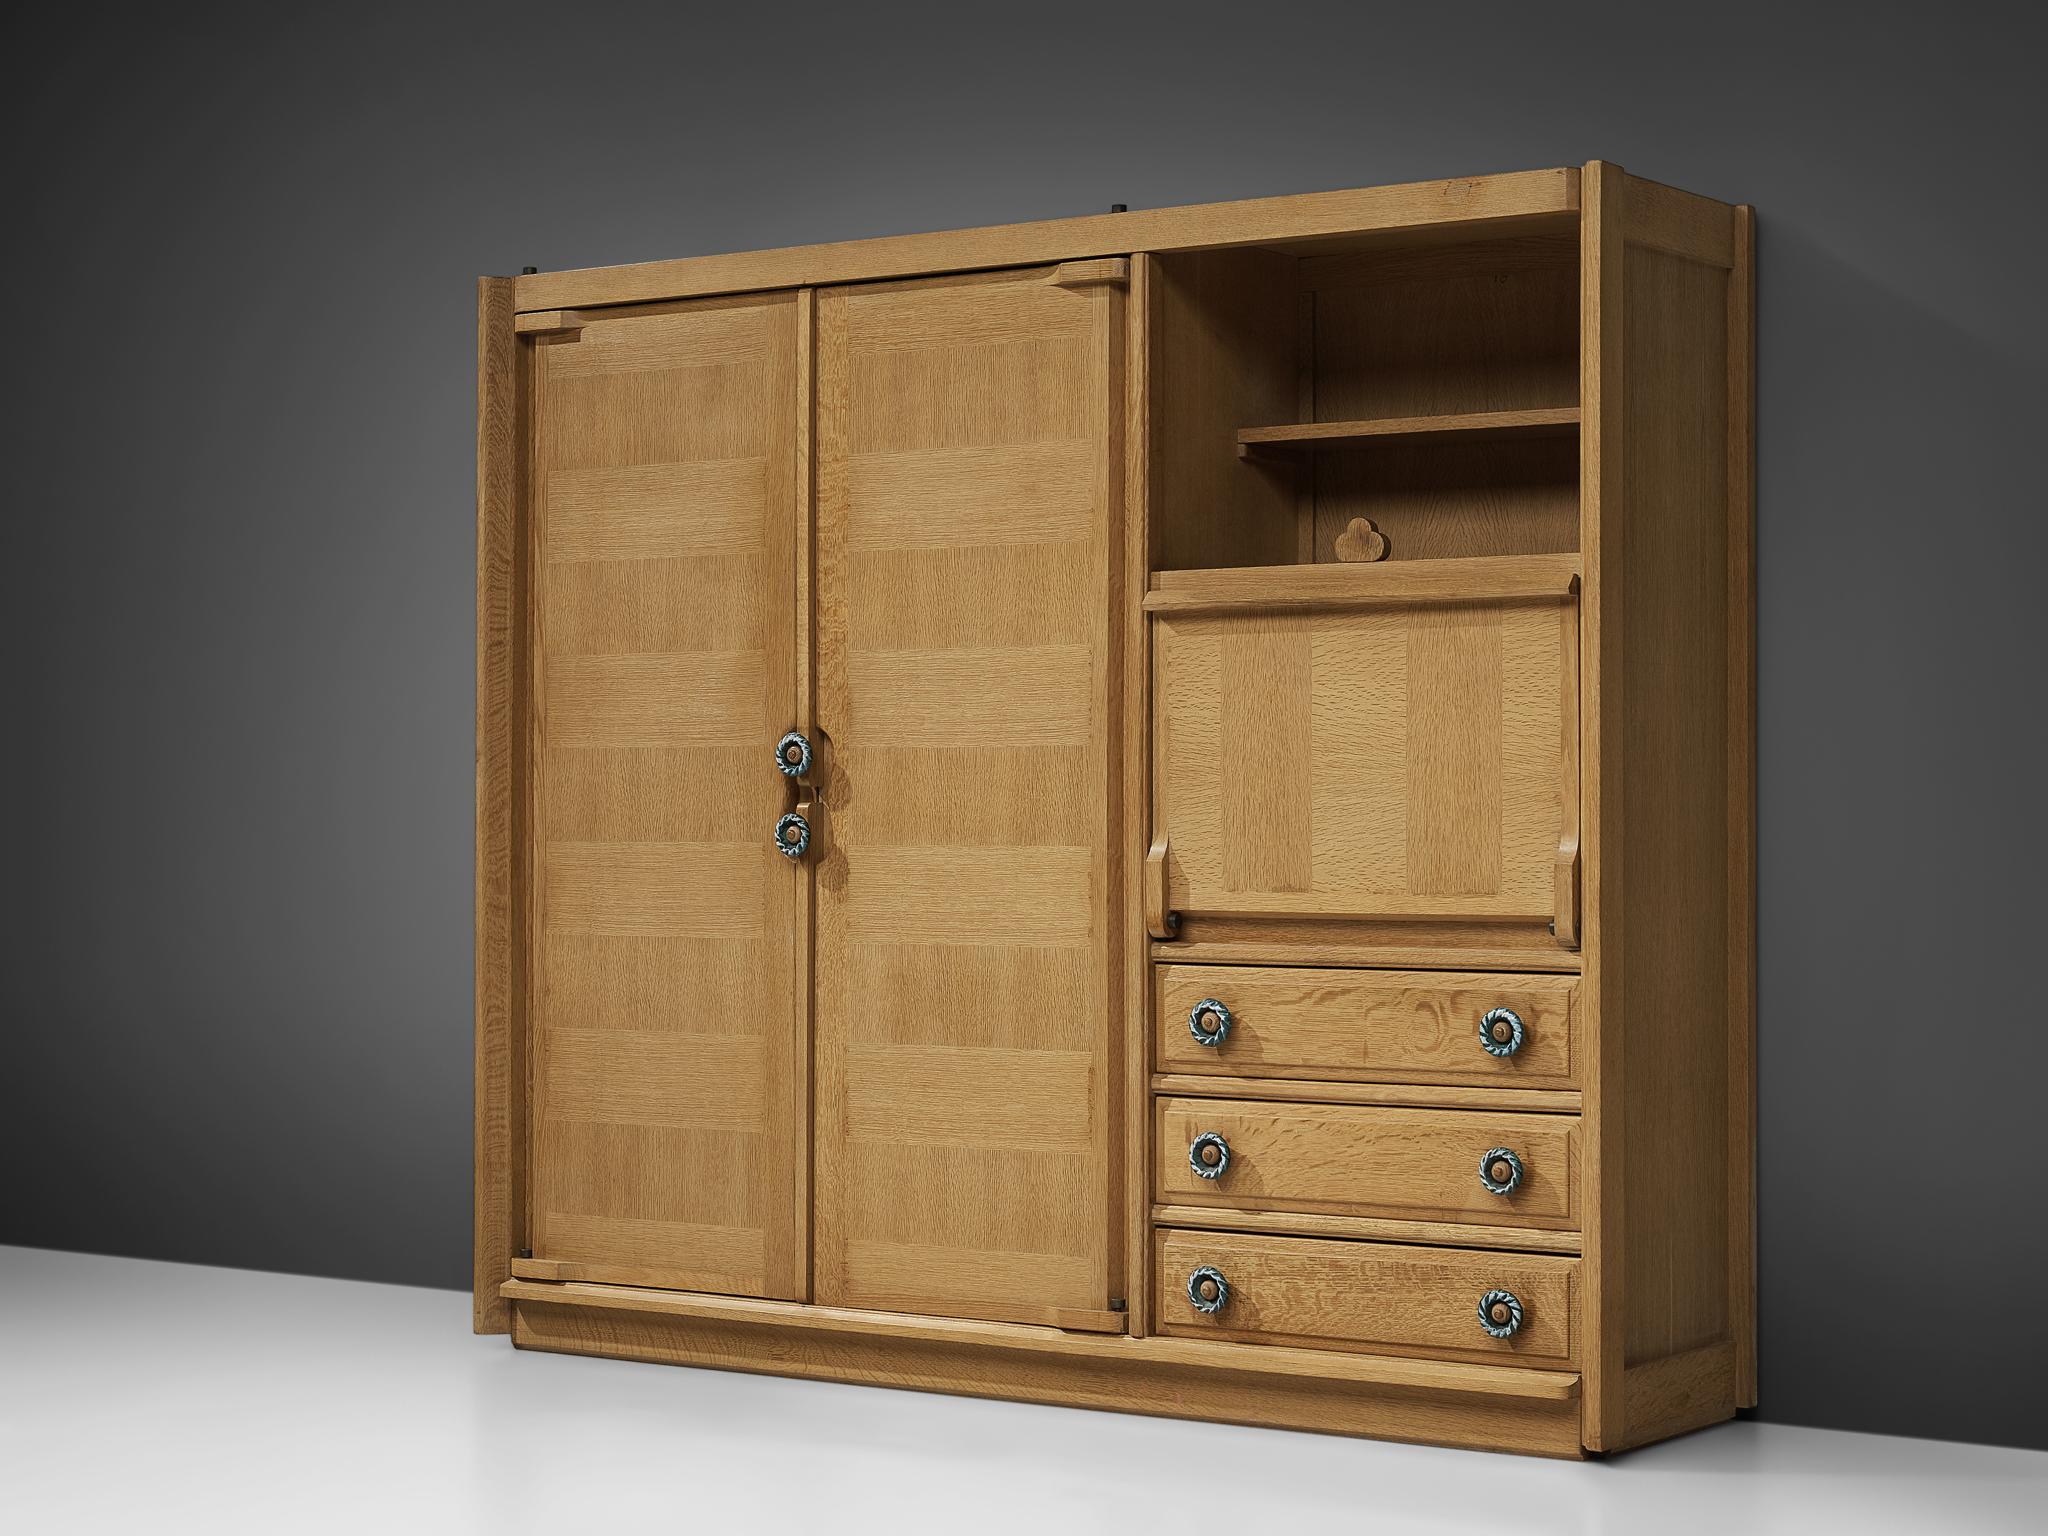 Guillerme and Chambron, highboard, oak, France, 1960s.

This case piece is designed by Guillerme and Chambron and features geometric engravings in the doors of the high part and few drawers at the lower part. The piece is typical for the design of